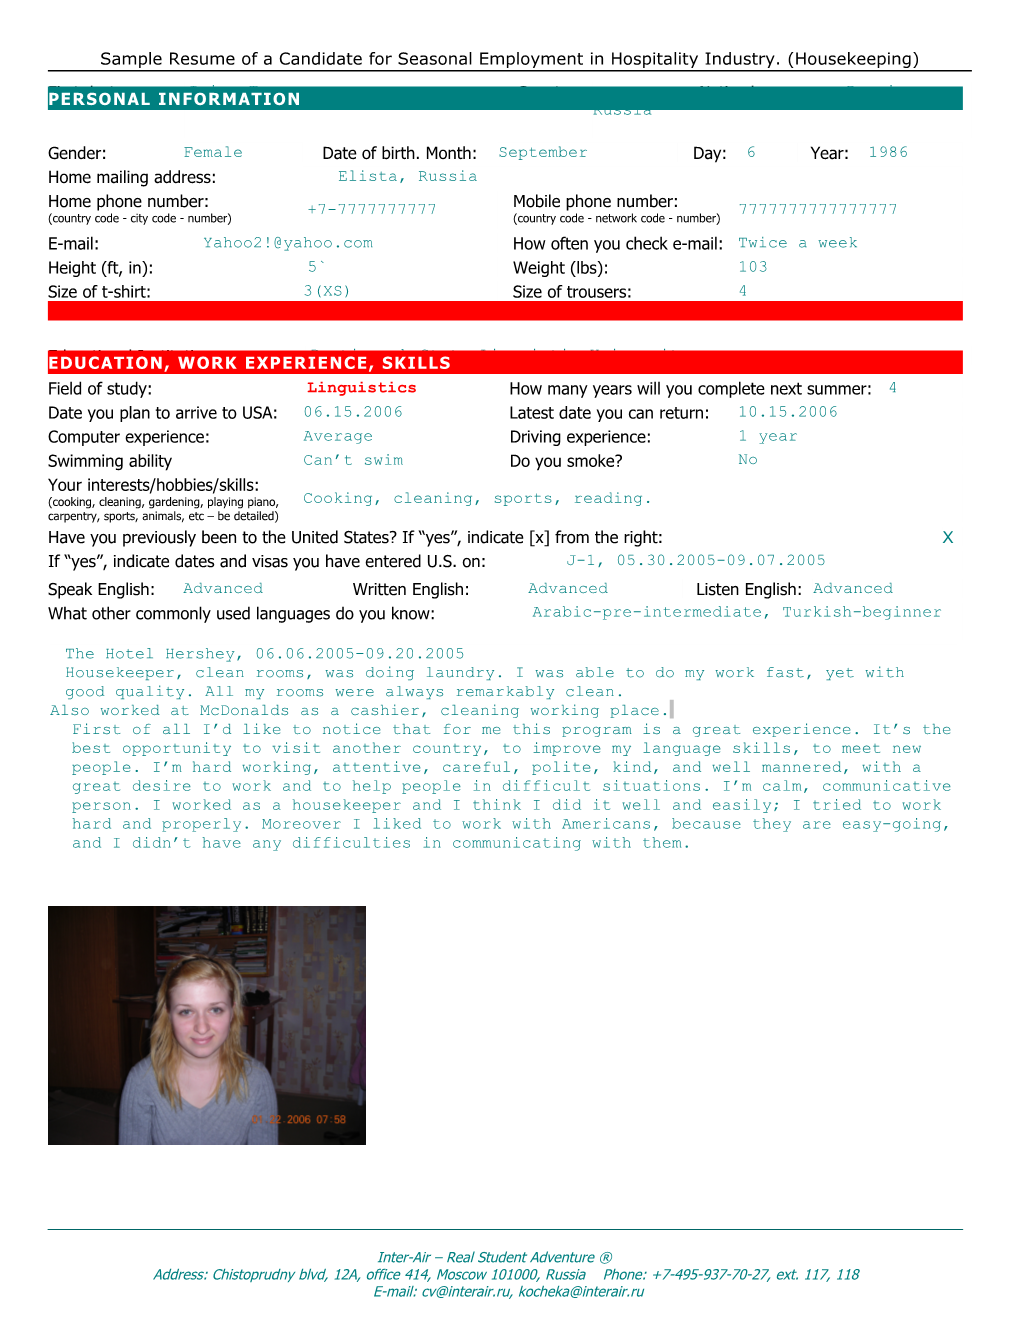 Sample Resume of a Housekeeper from Russia